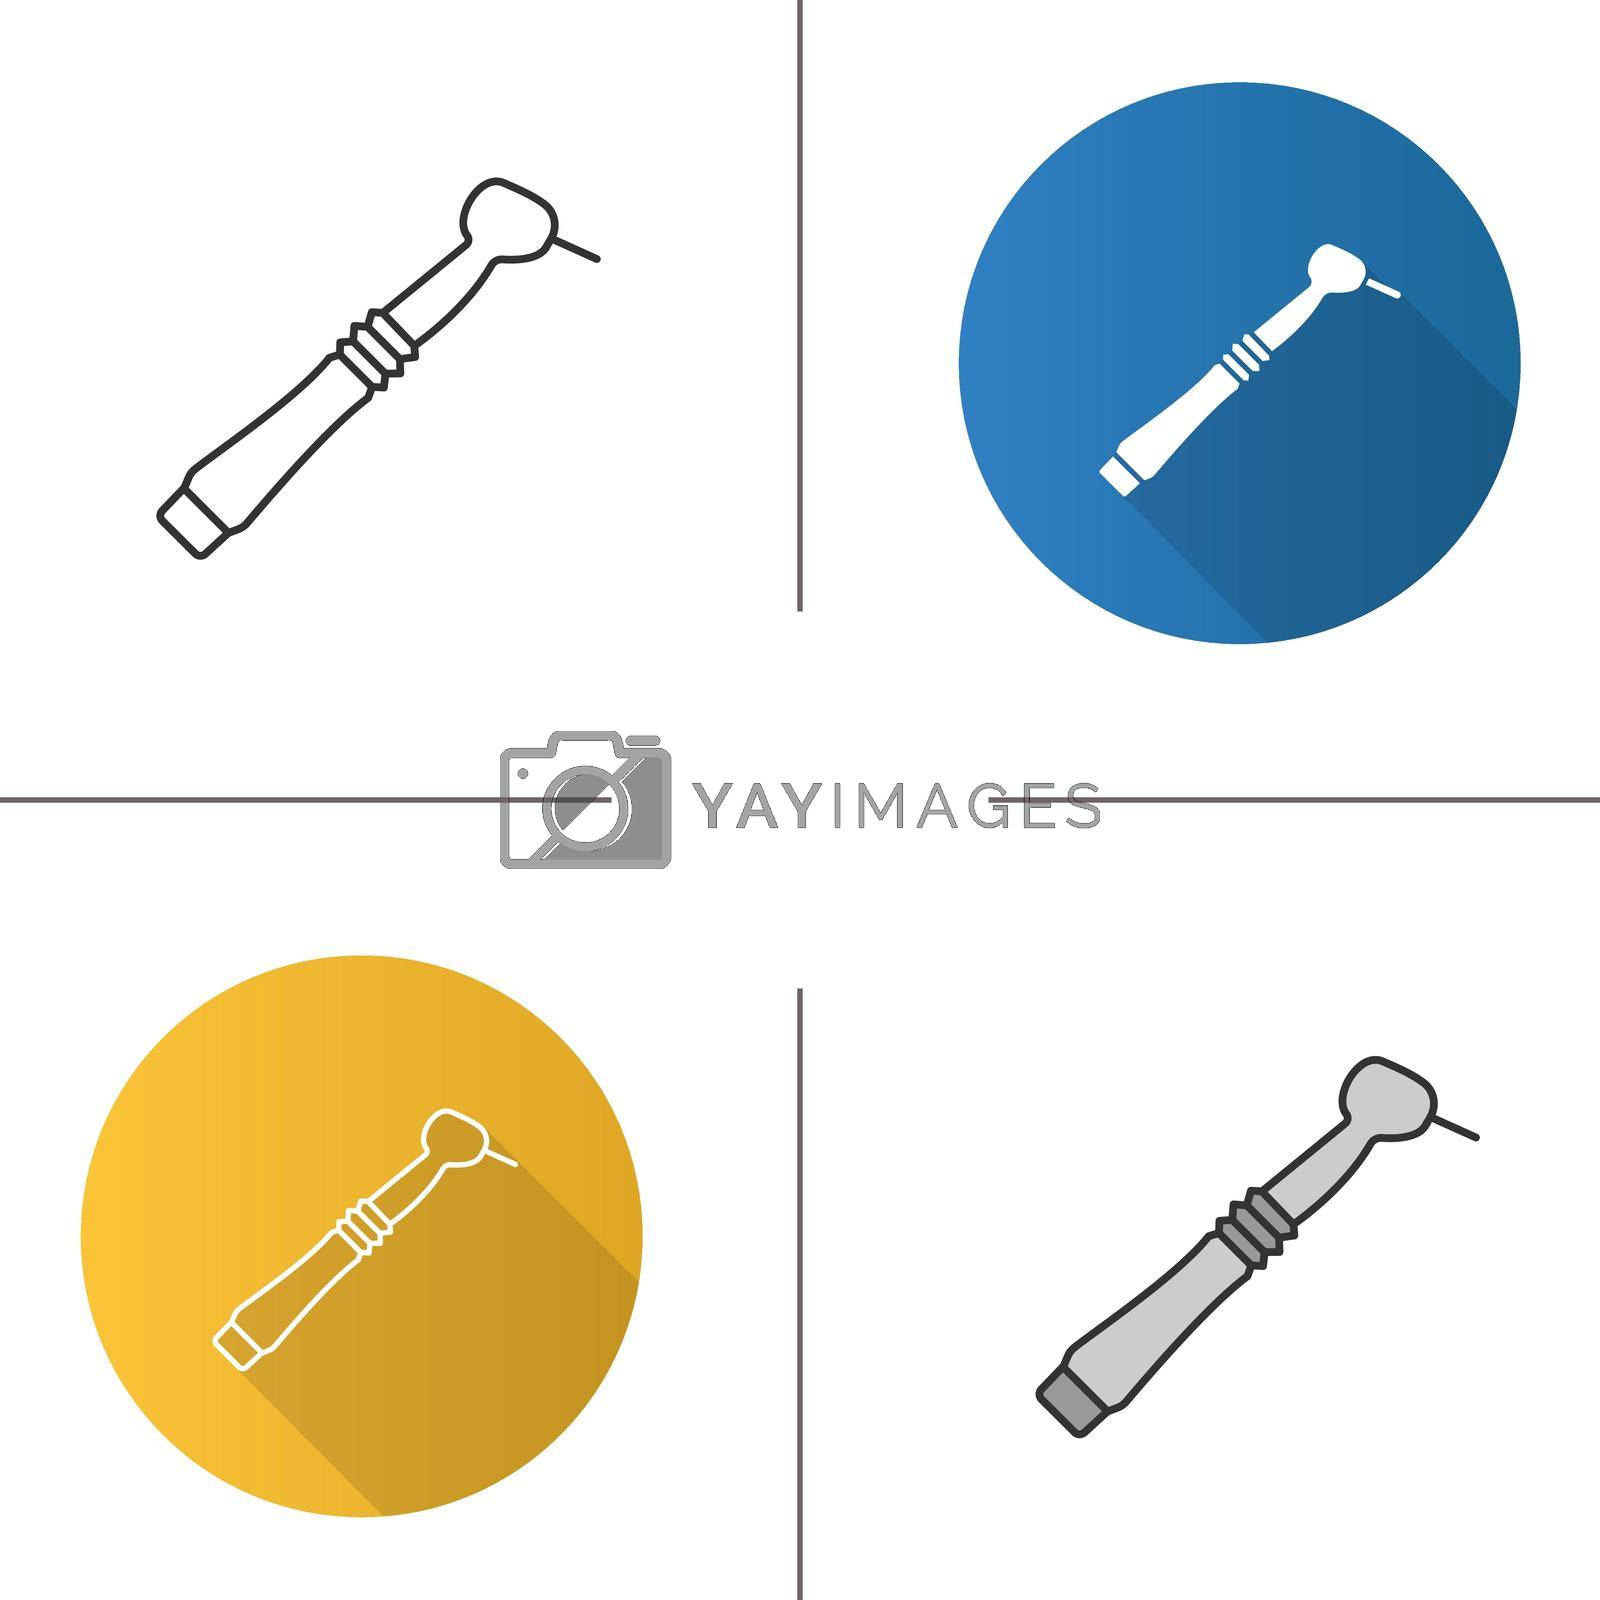 Dental drill icon. Dental handpiece. Flat design, linear and color styles. Isolated vector illustrations